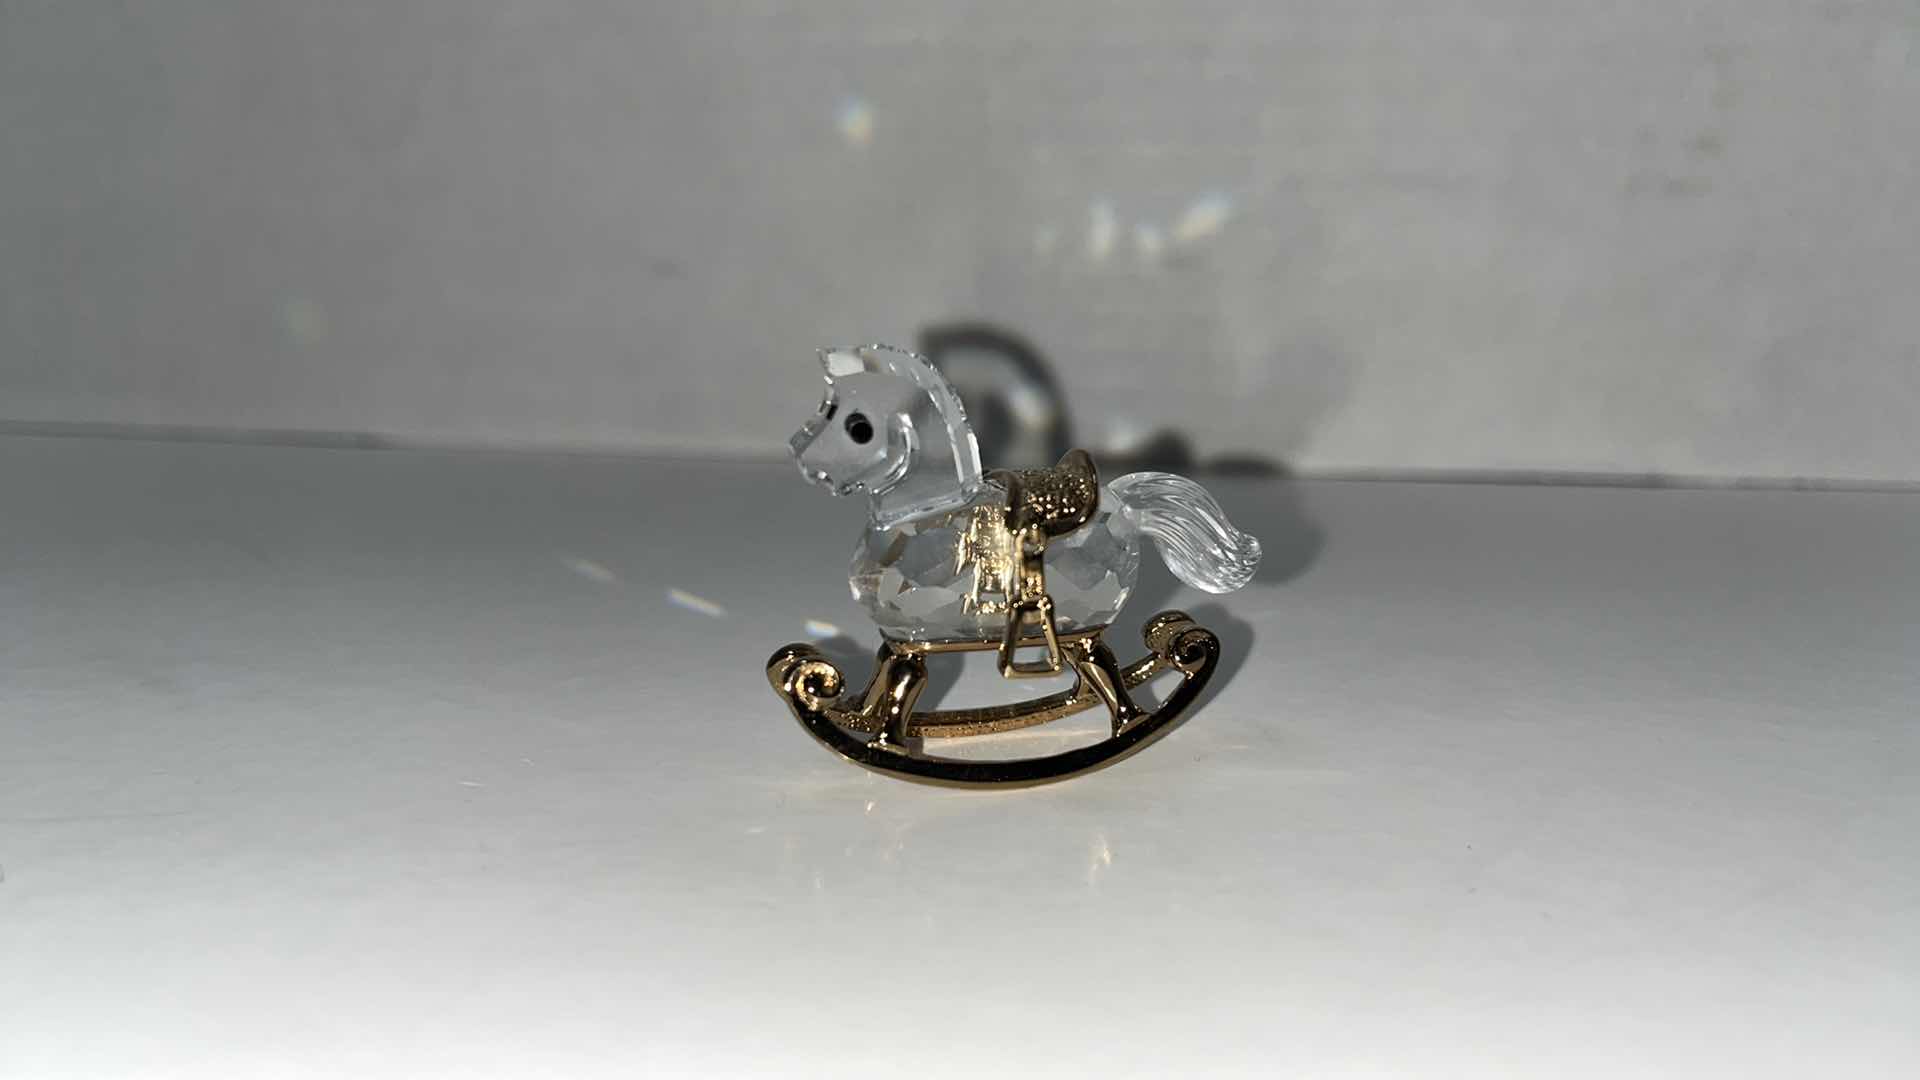 Photo 4 of HAND BLOWN CLEAR GLASS ROCKING UNICORN W GOLD ACCENTS 4.75” X 2” H4”W CRYSTAL ROCKING HORSE W GOLD ACCENTS (2)